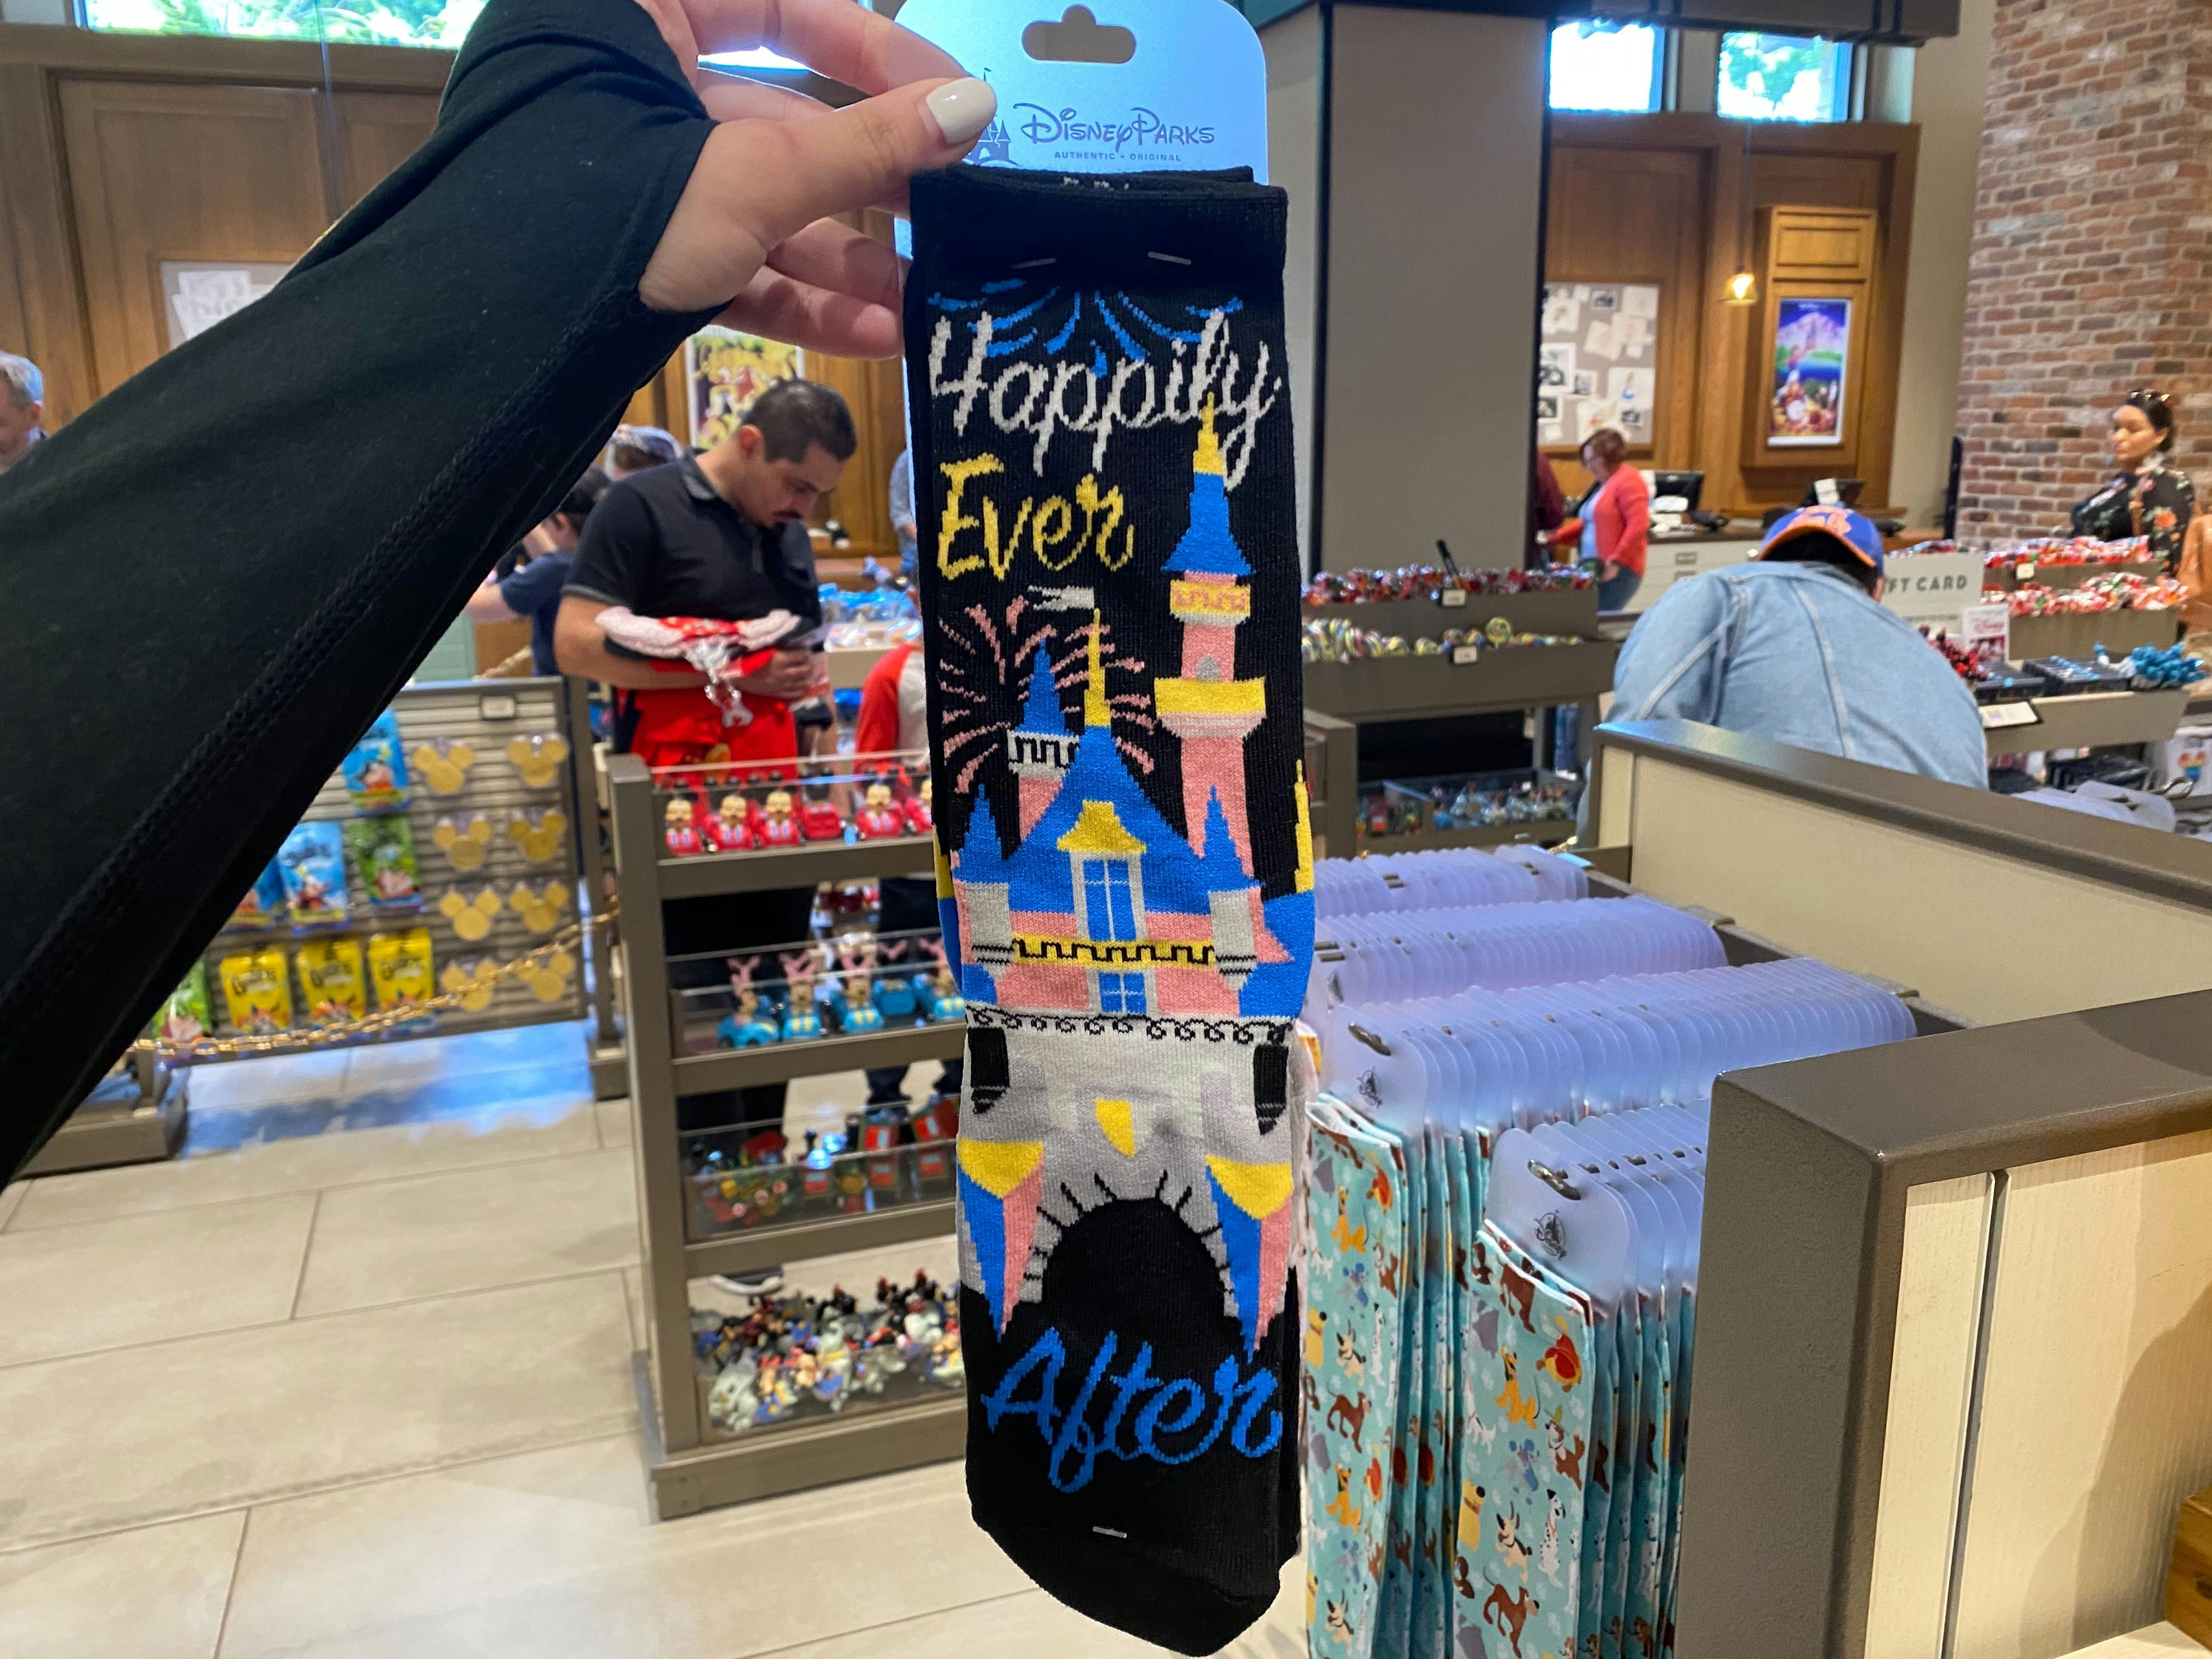 Happily Ever After Sleeping Beauty Castle Socks - $14.99